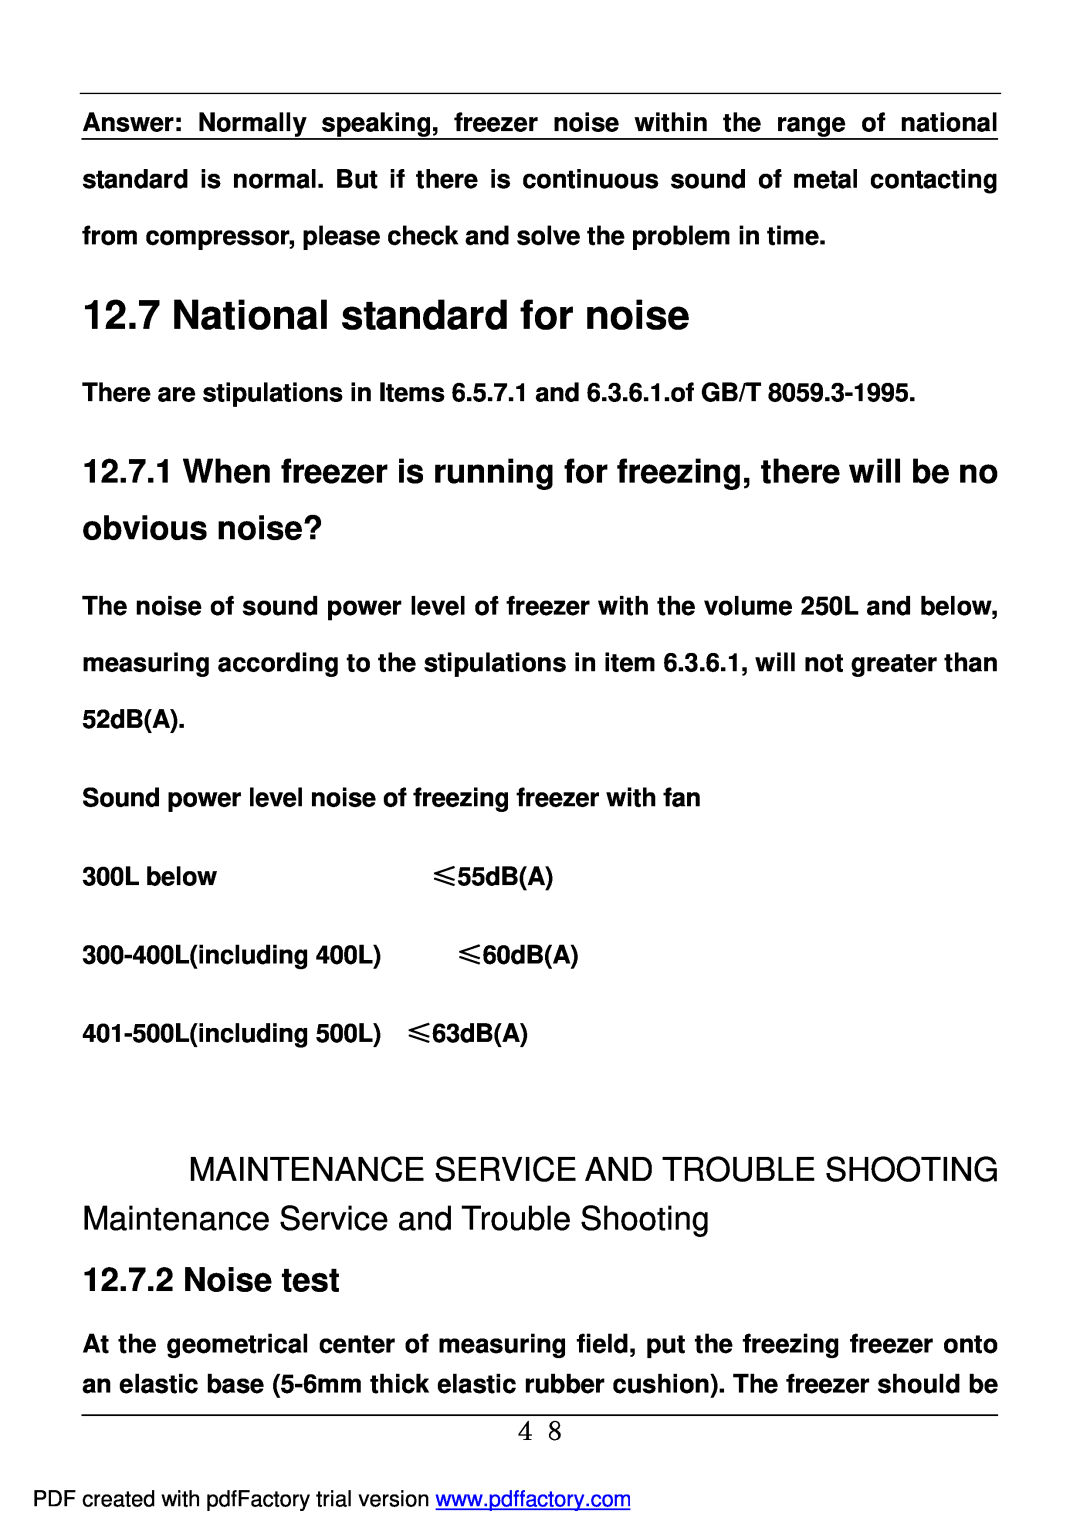 Haier BD-478A service manual National standard for noise, Noise test 